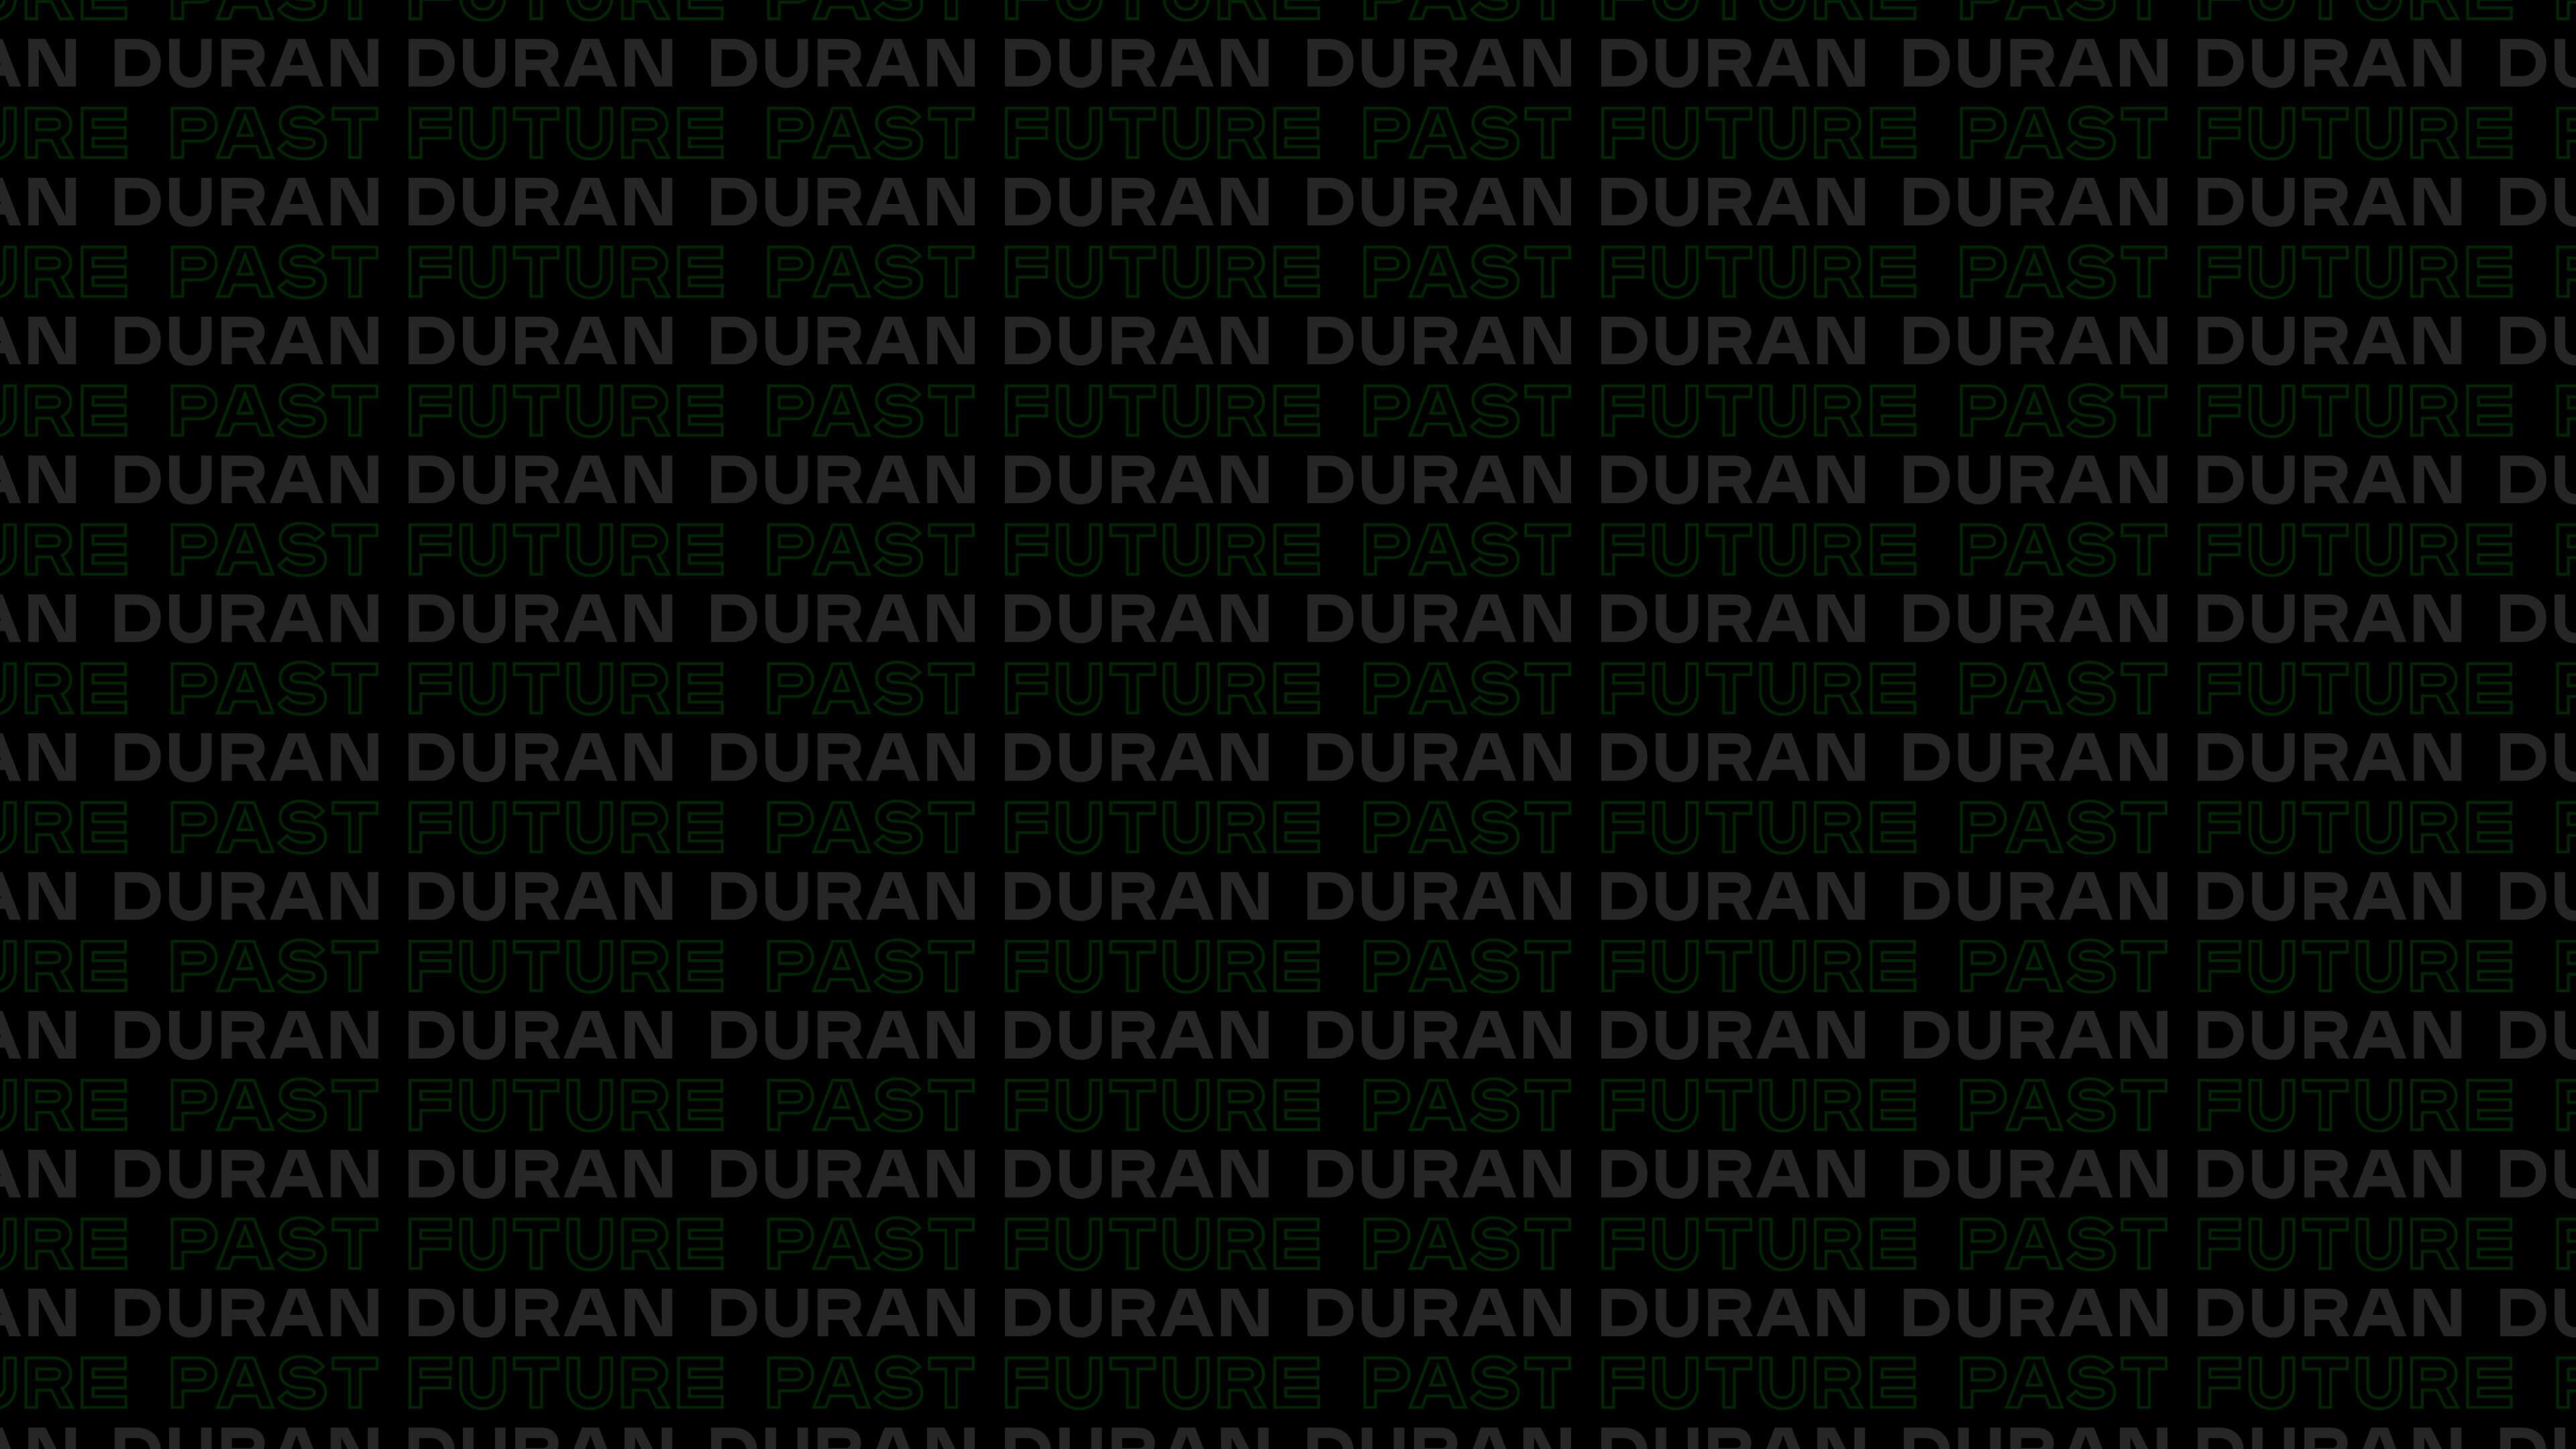 Duran Duran:  Future Past - Live in Concert on DREAMSTAGE backdrop